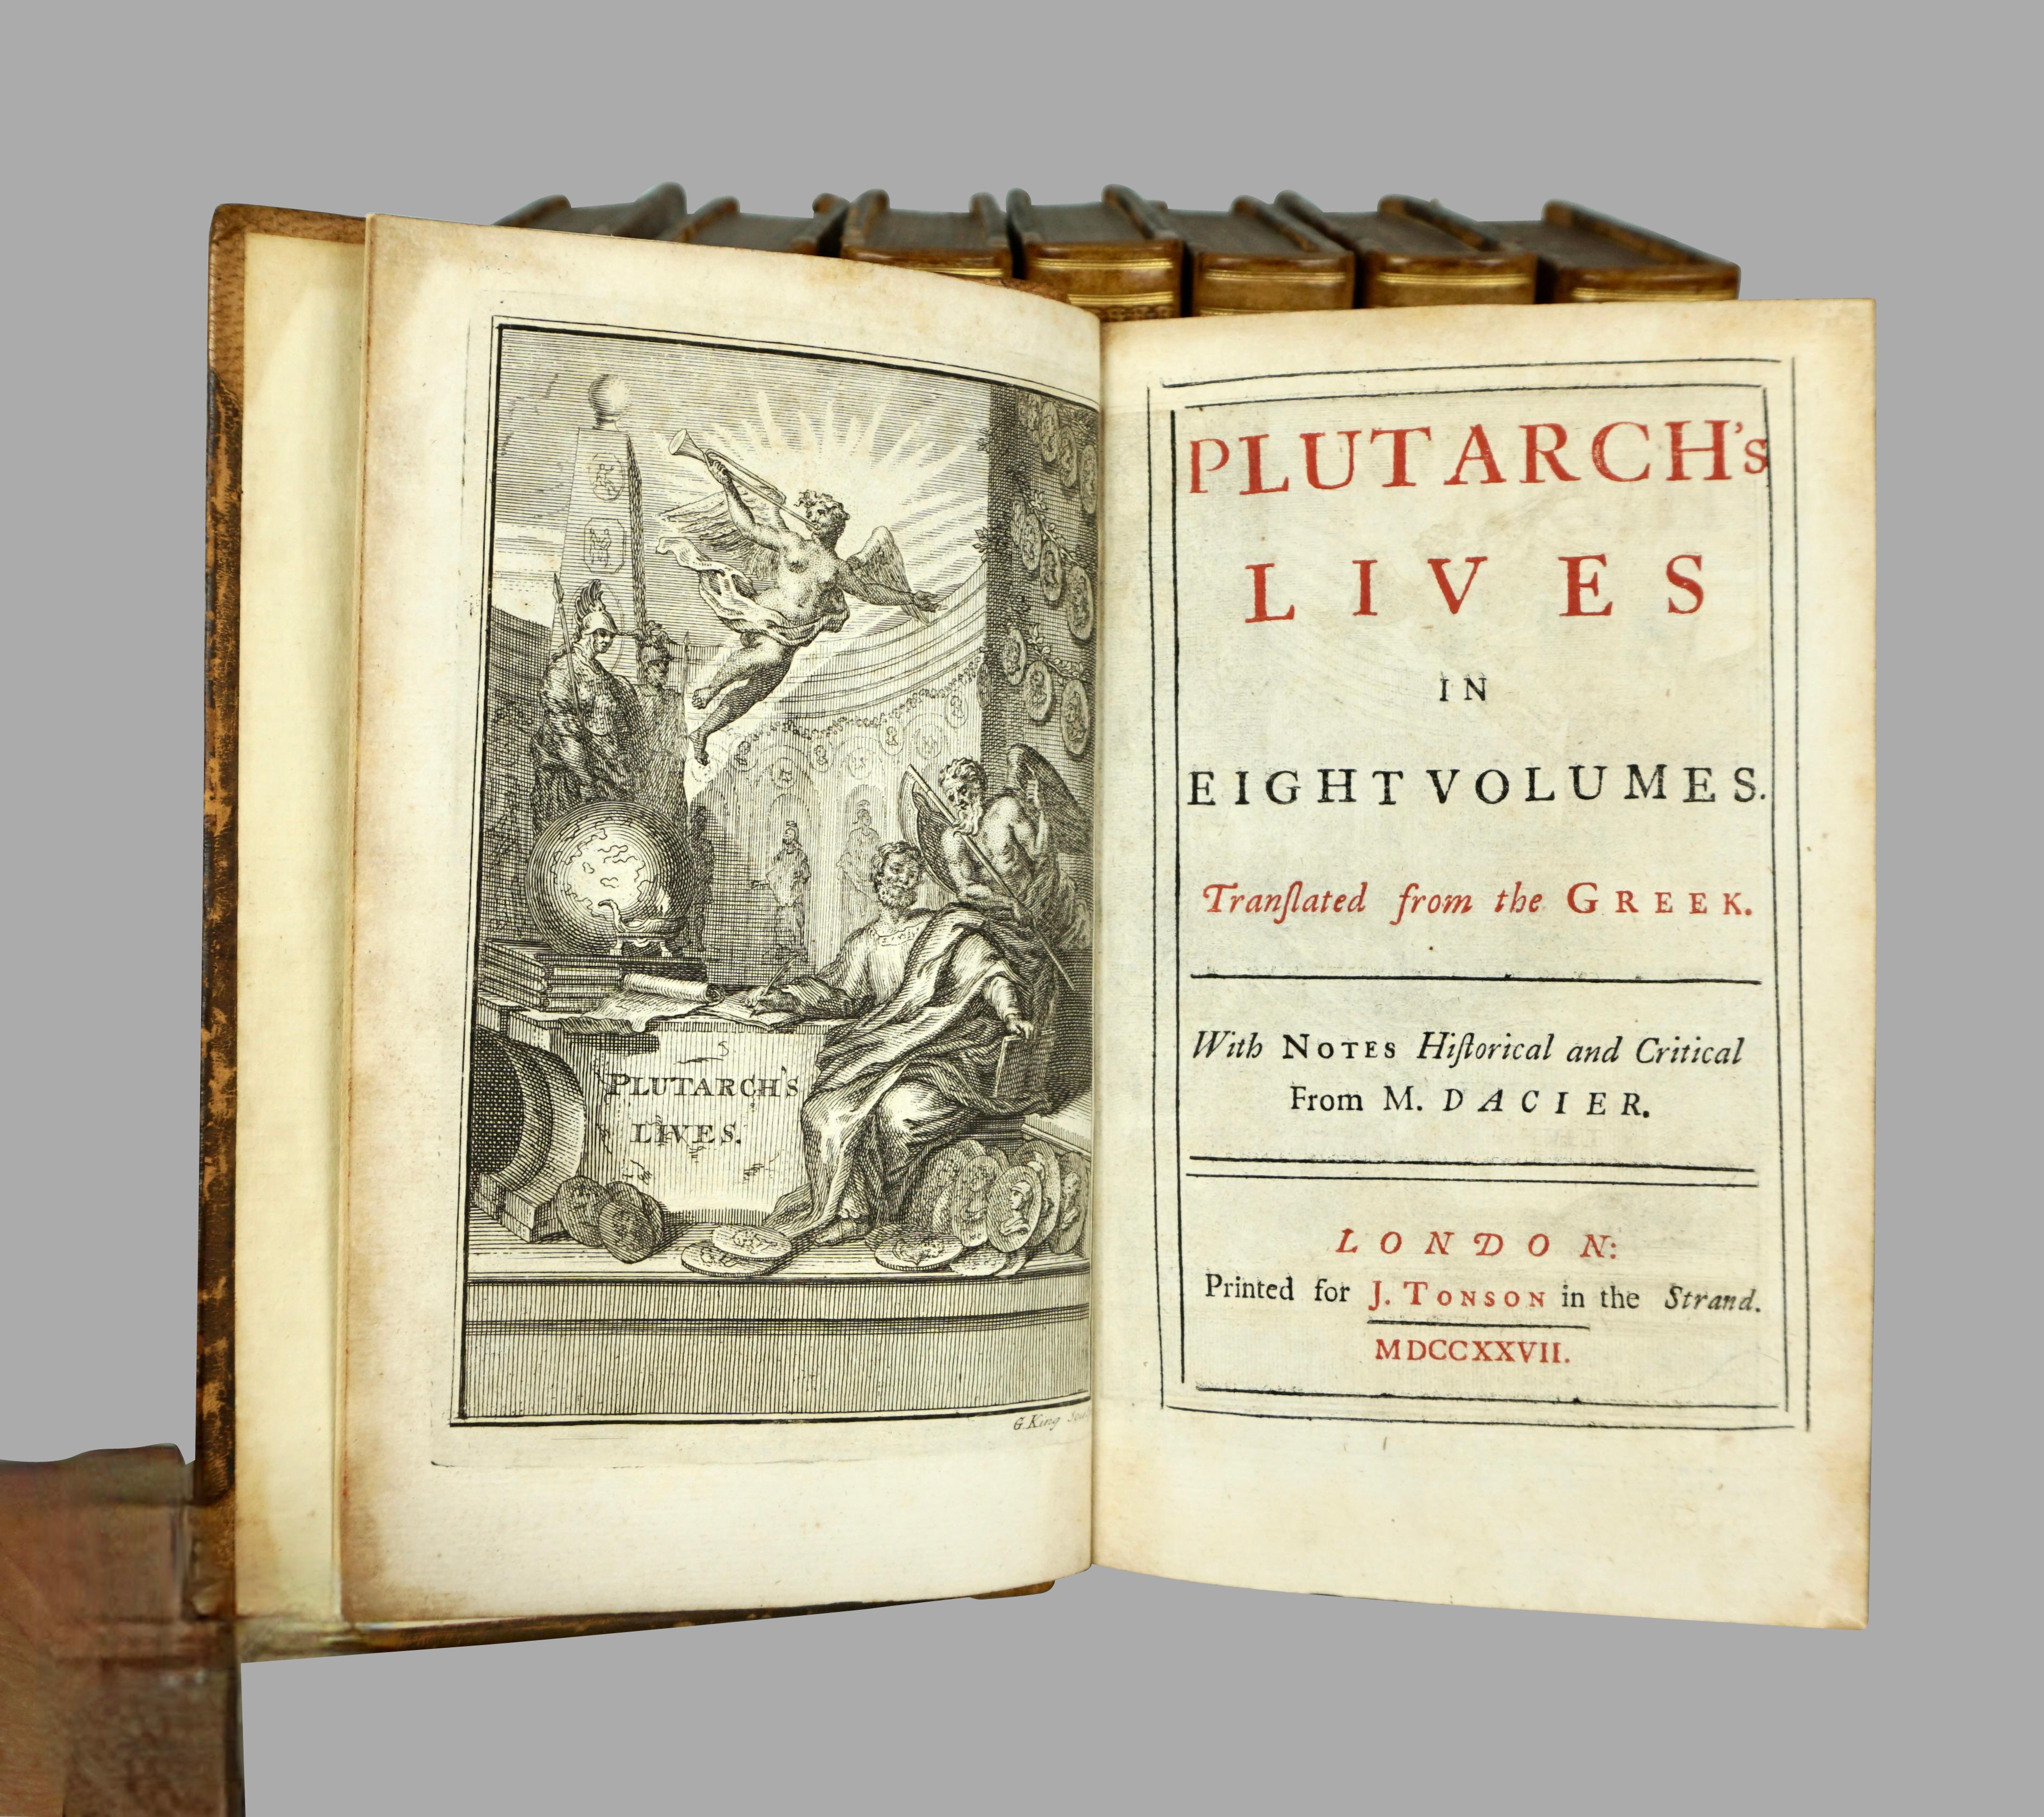 Early 18th Century Plutarch's Lives in 8 Leatherbound Volumes Published London, J. Tonson 1727